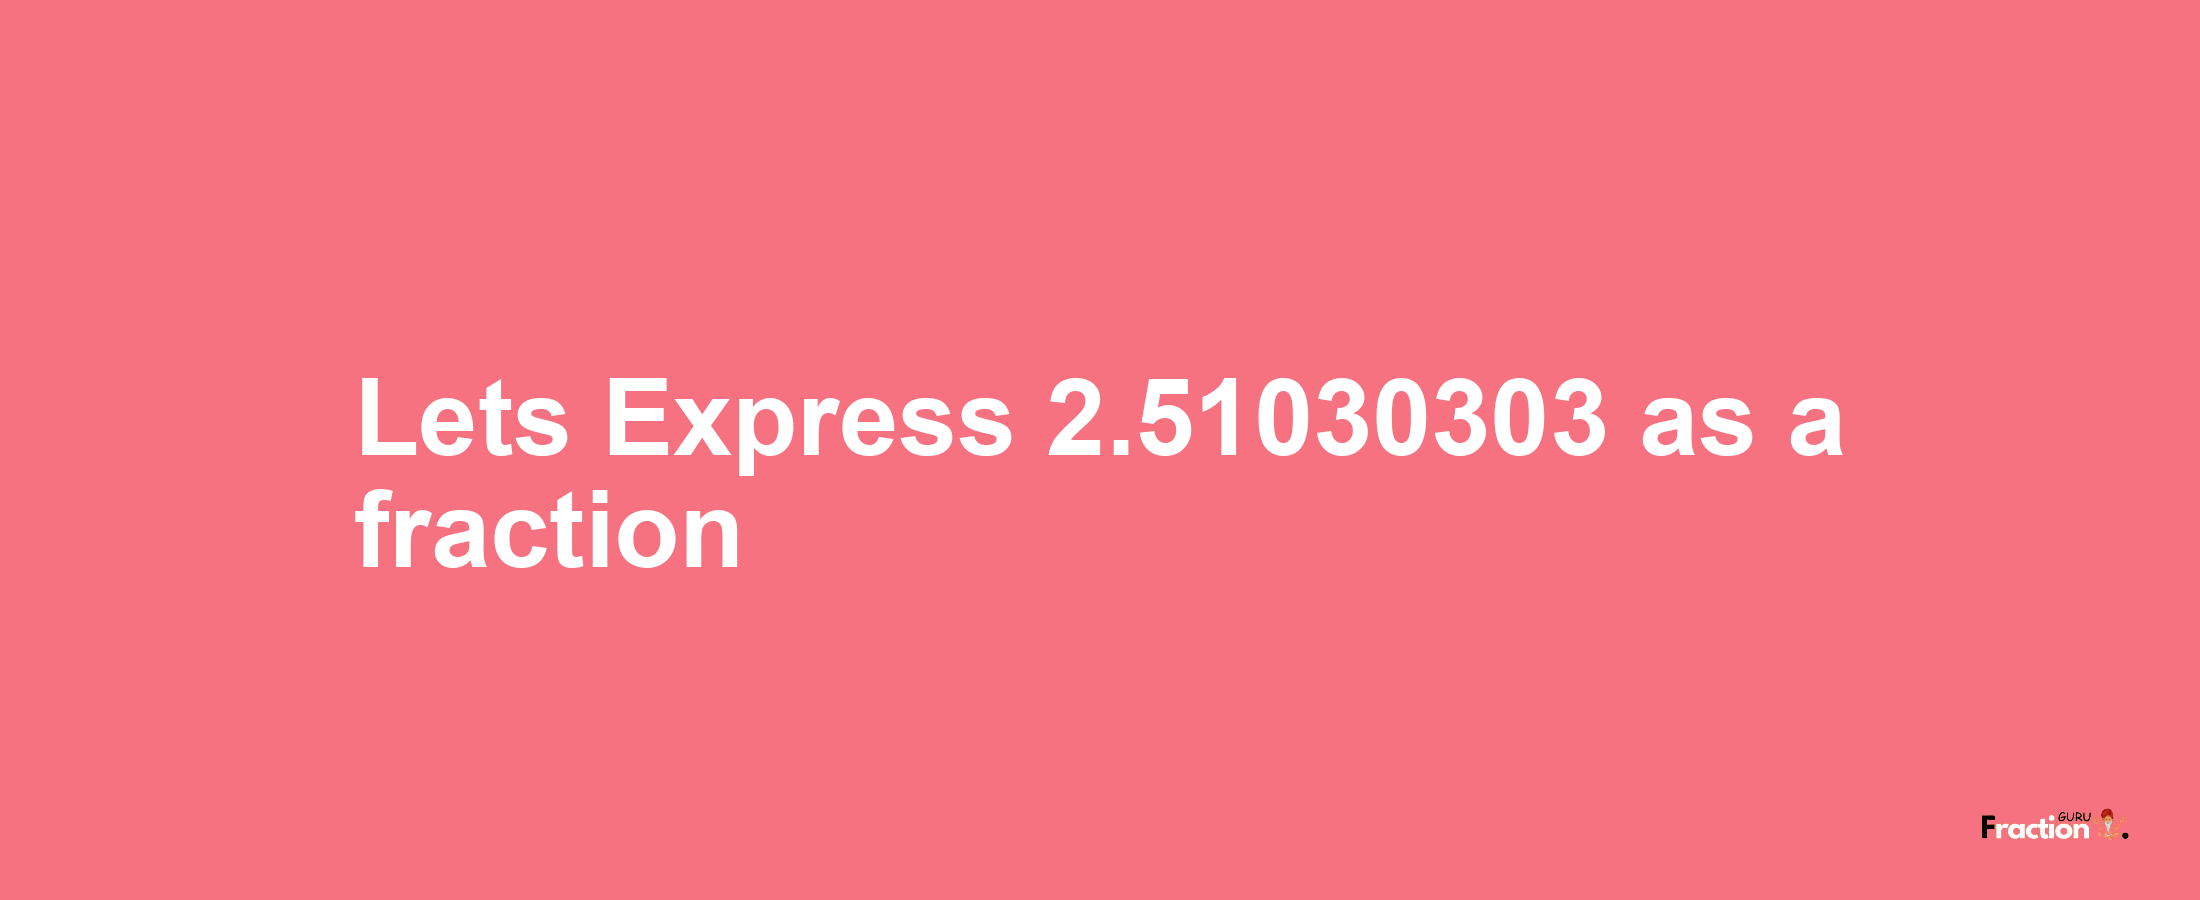 Lets Express 2.51030303 as afraction